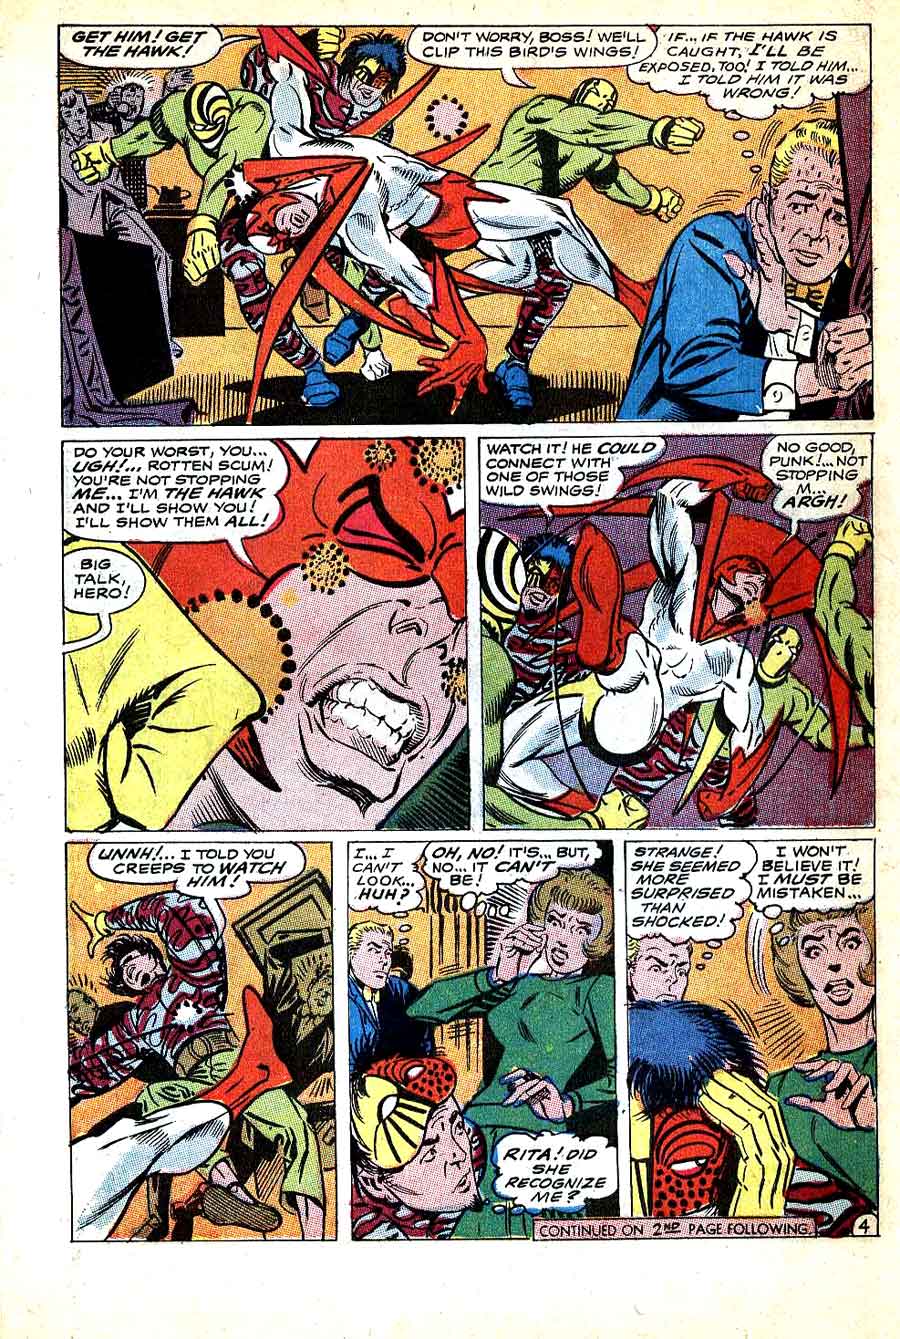 Hawk and the Dove v1 #1 dc silver age 1960s comic book page art by Steve Ditko